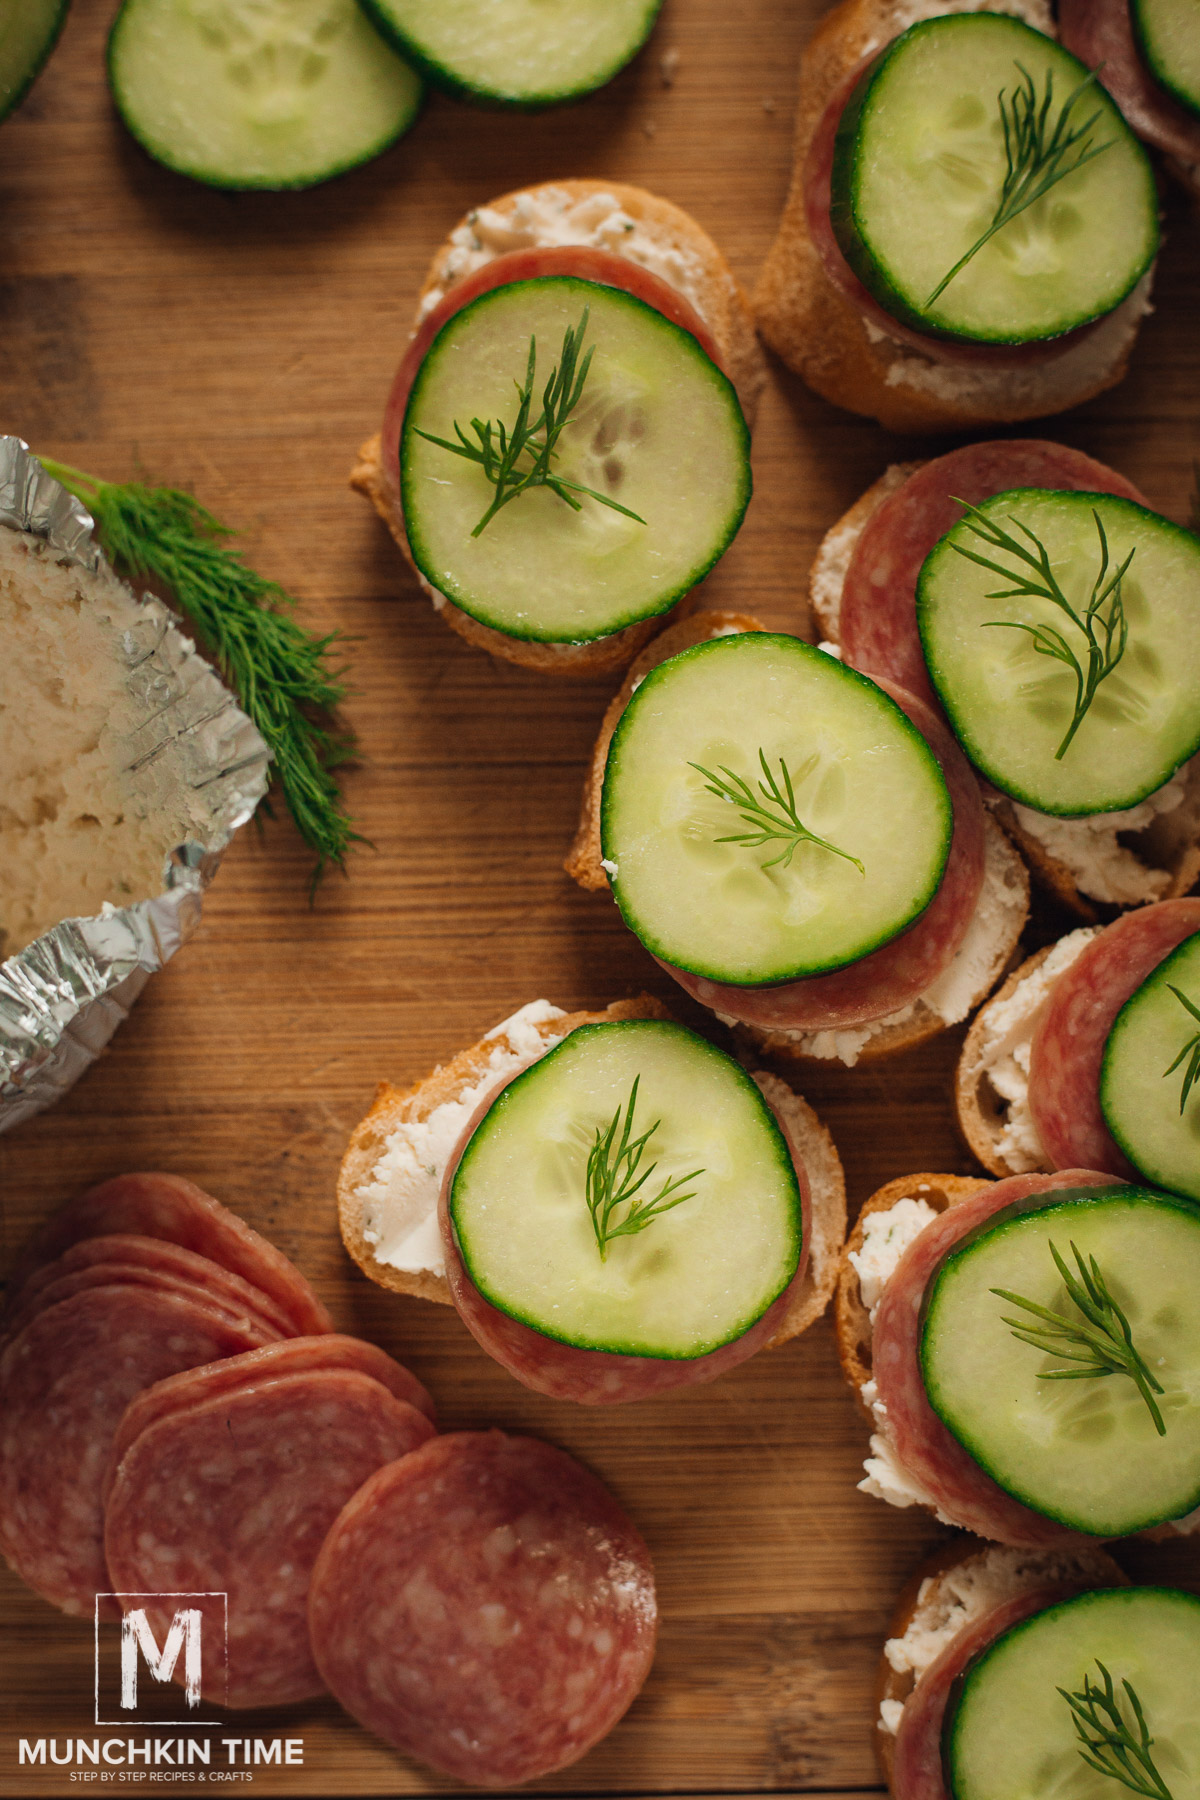 How to Make the Best Cucumber Sandwiches